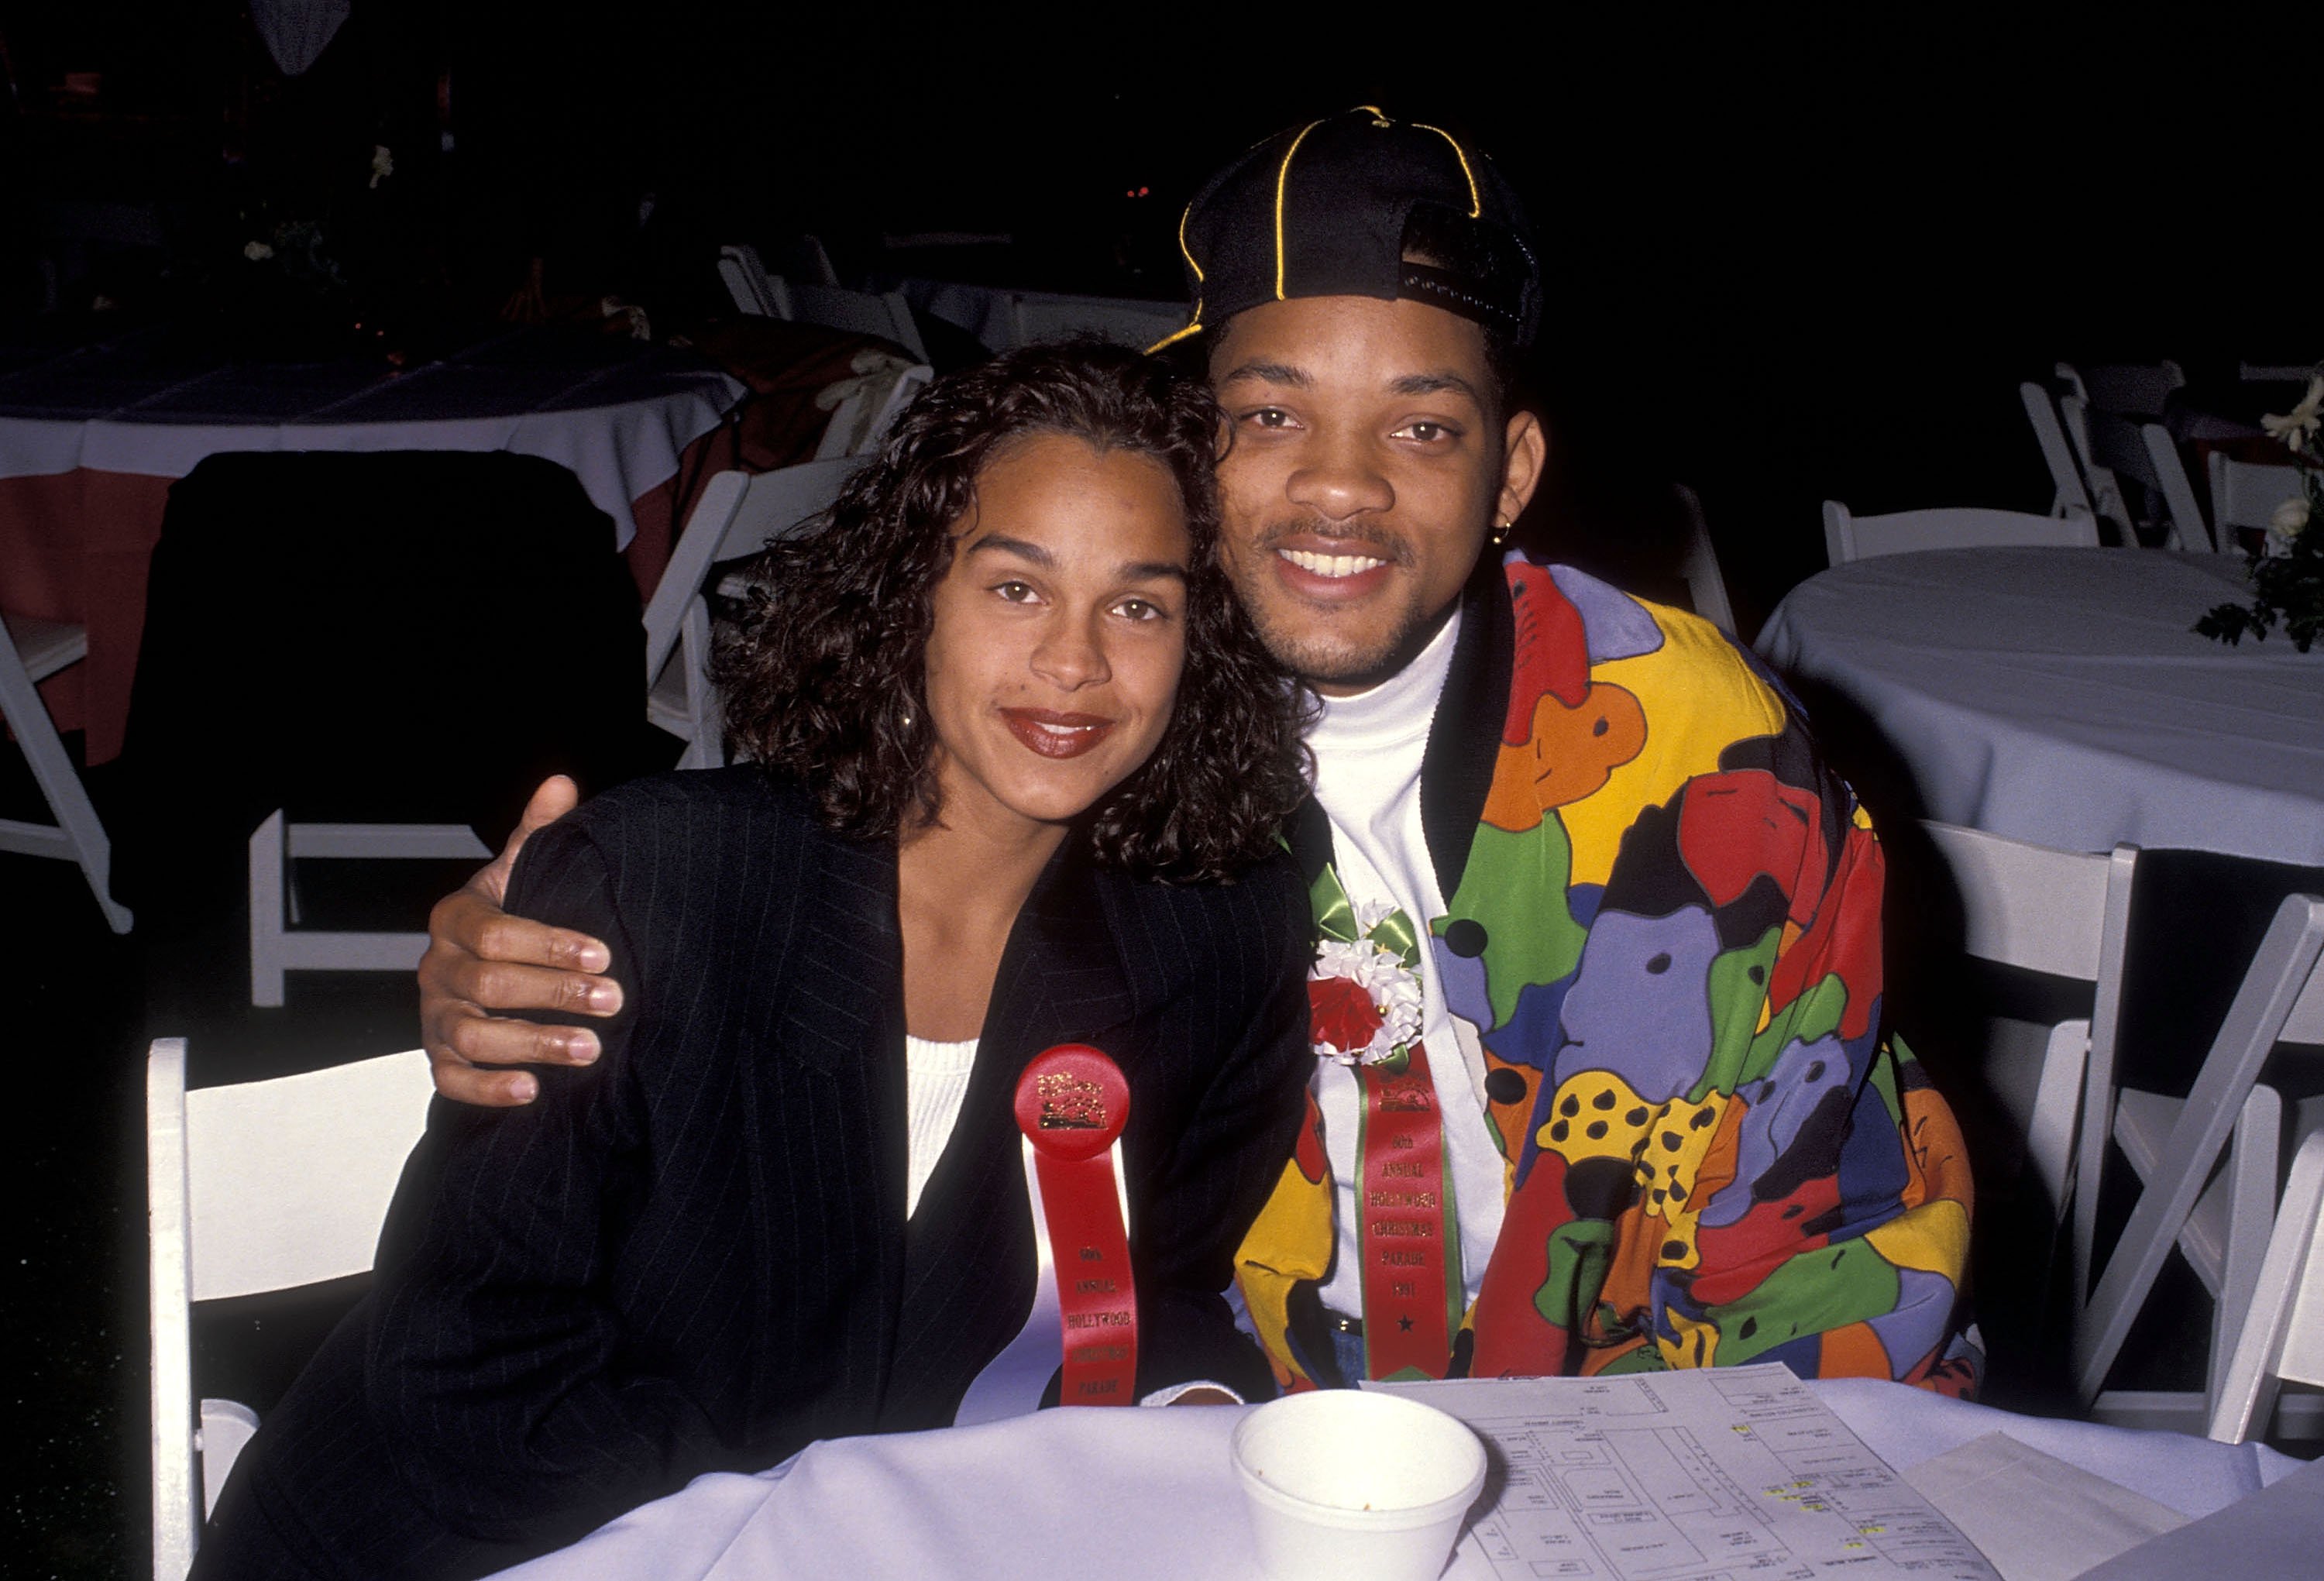 Will Smith and Sheree Zampino at the 60th Annual Hollywood Christmas Parade on December 1, 1991 at KTLA Studios in Hollywood, California.| Source: Getty Images